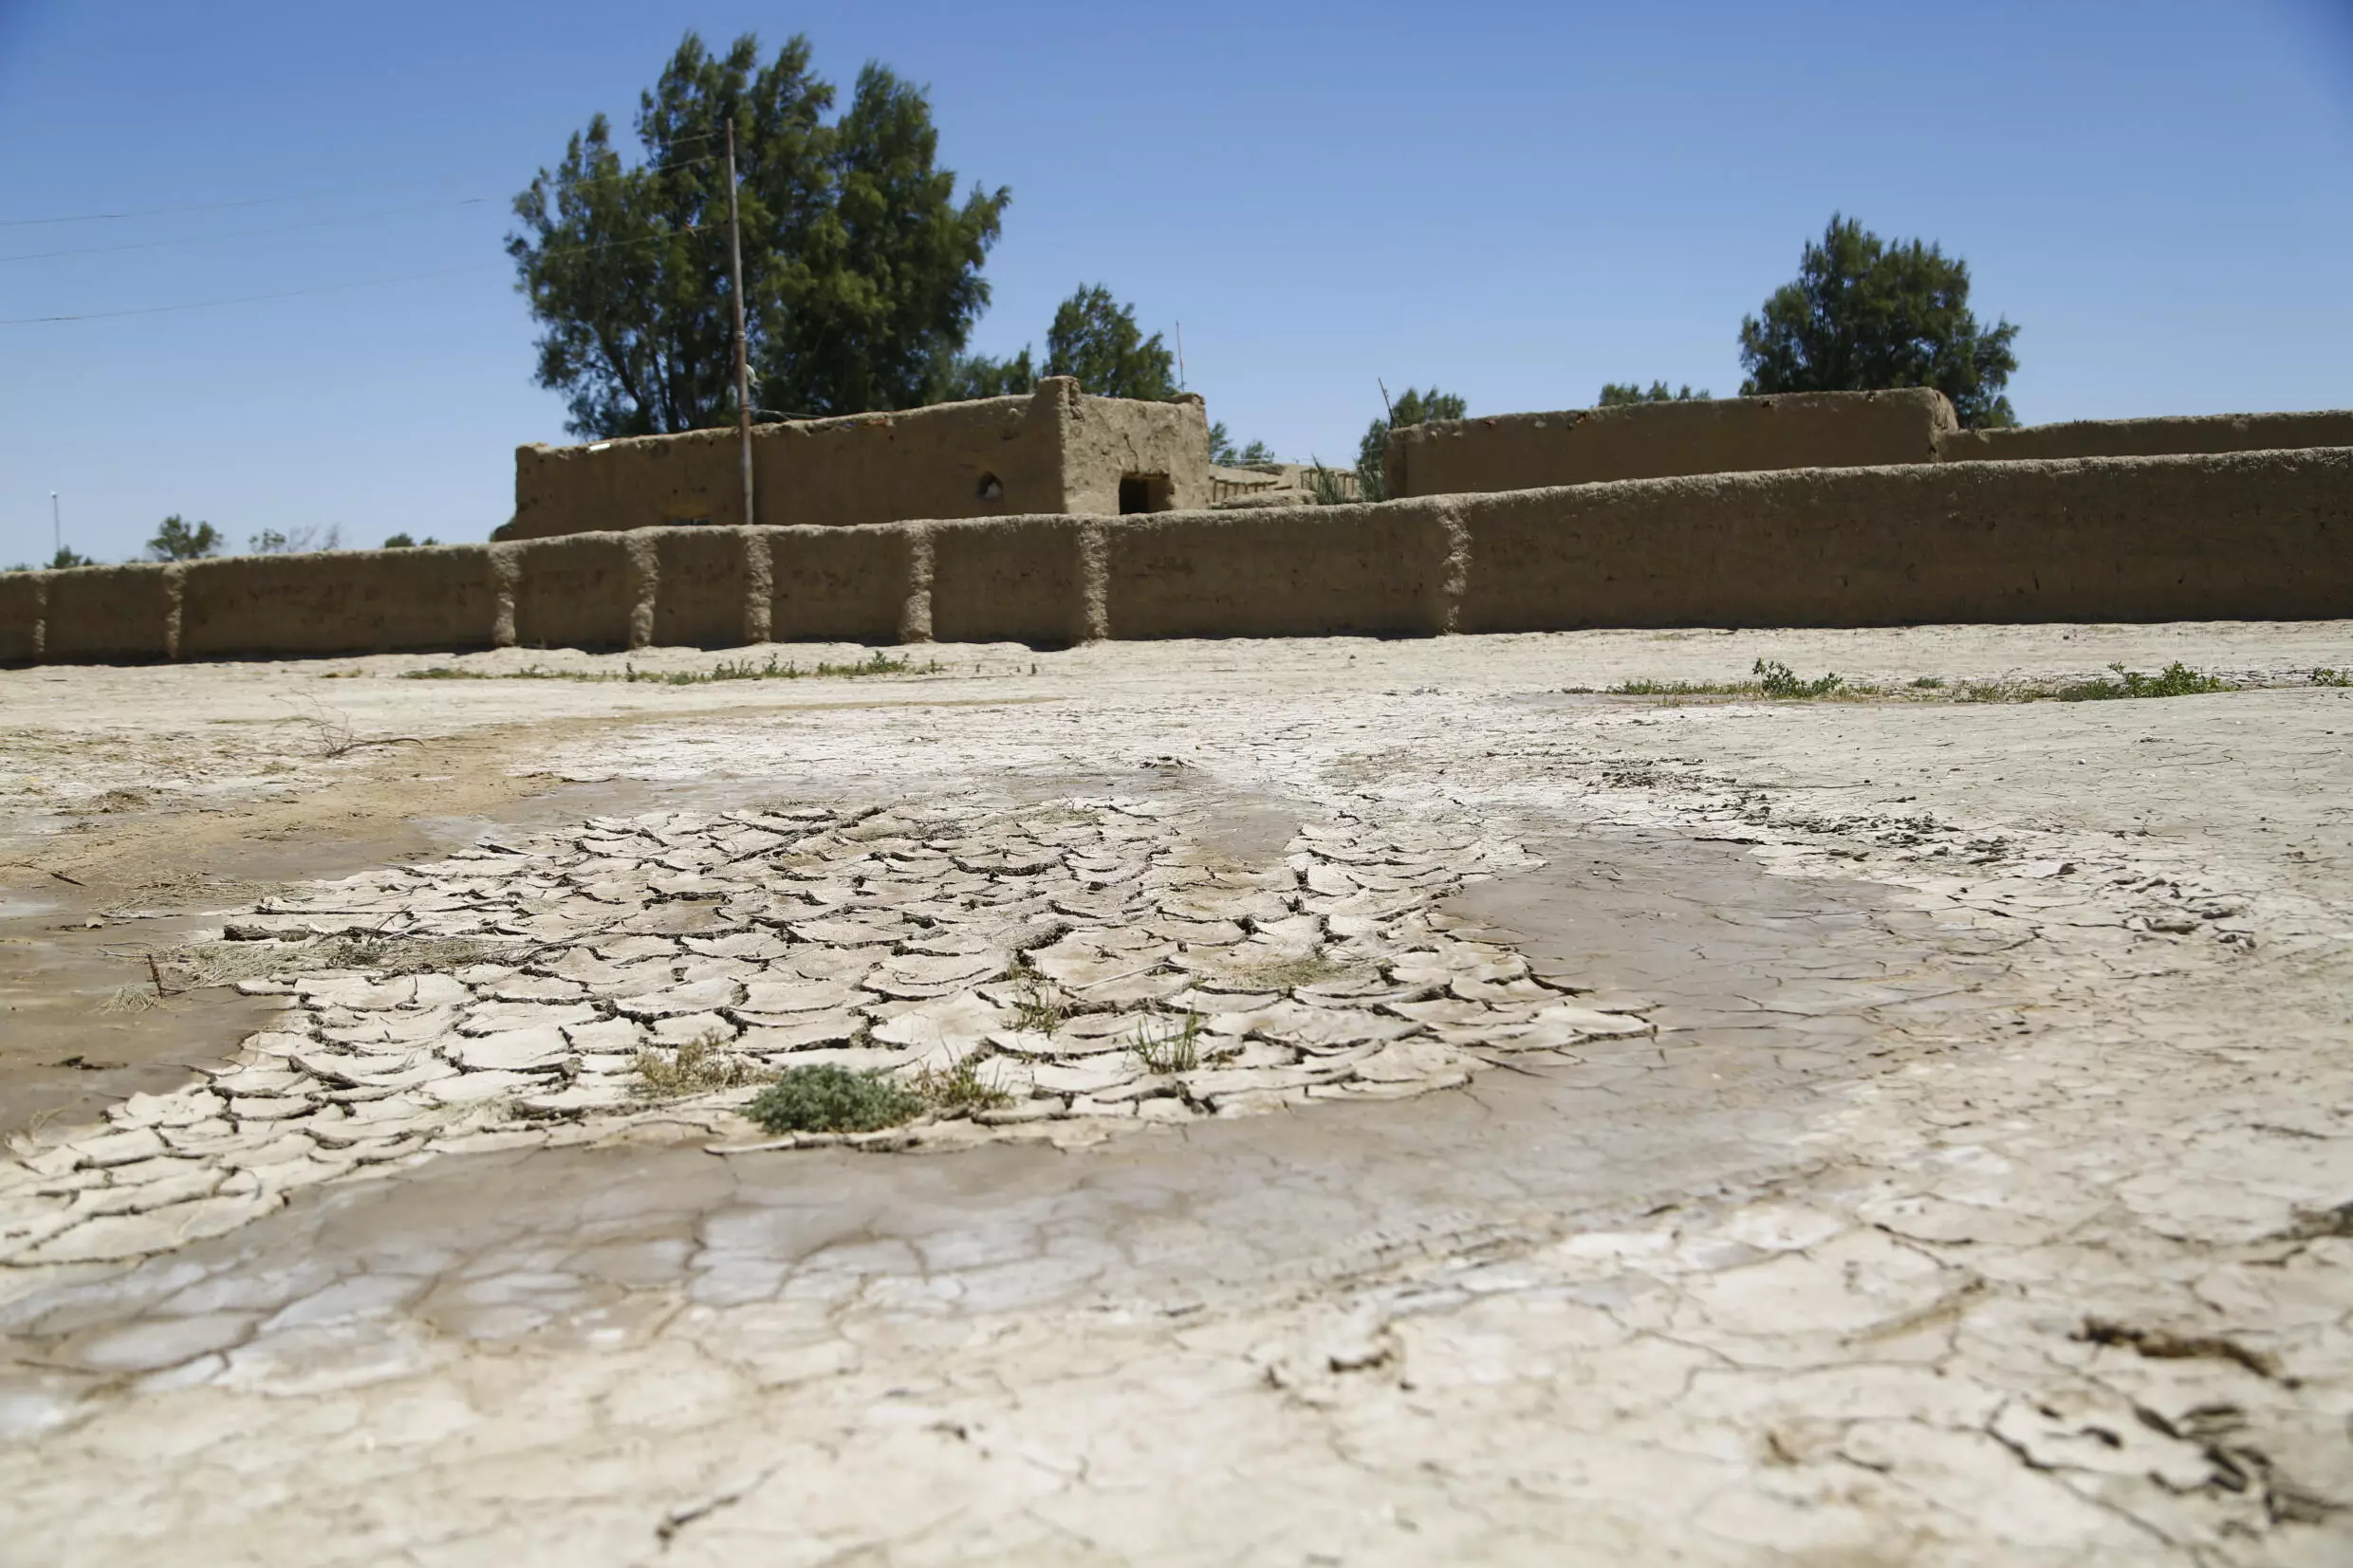 Rural areas are being deserted in Iraq, including the village of Al-Bouzayad, where the main irrigation canal has completely dried up. Photo: Hayder INDHAR / AFP